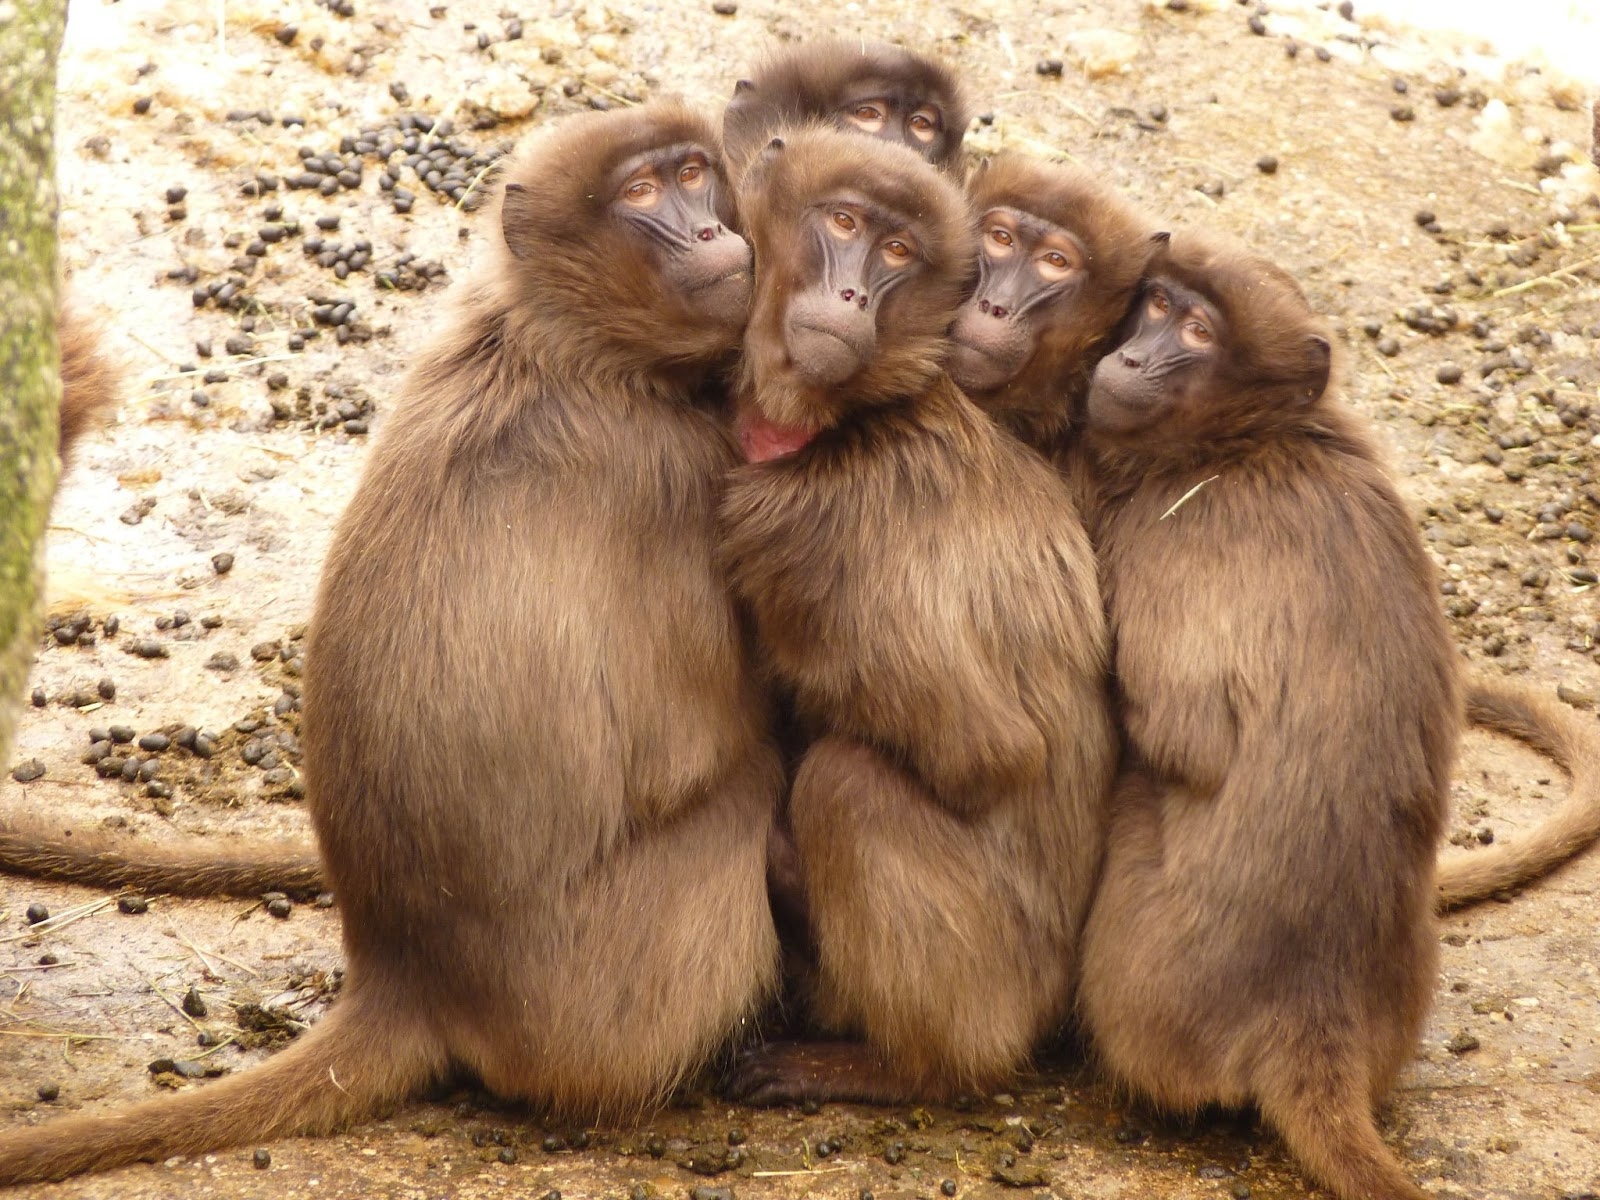 Monkeys: Nature’s Playful Wonders and the Battle for Their Survival